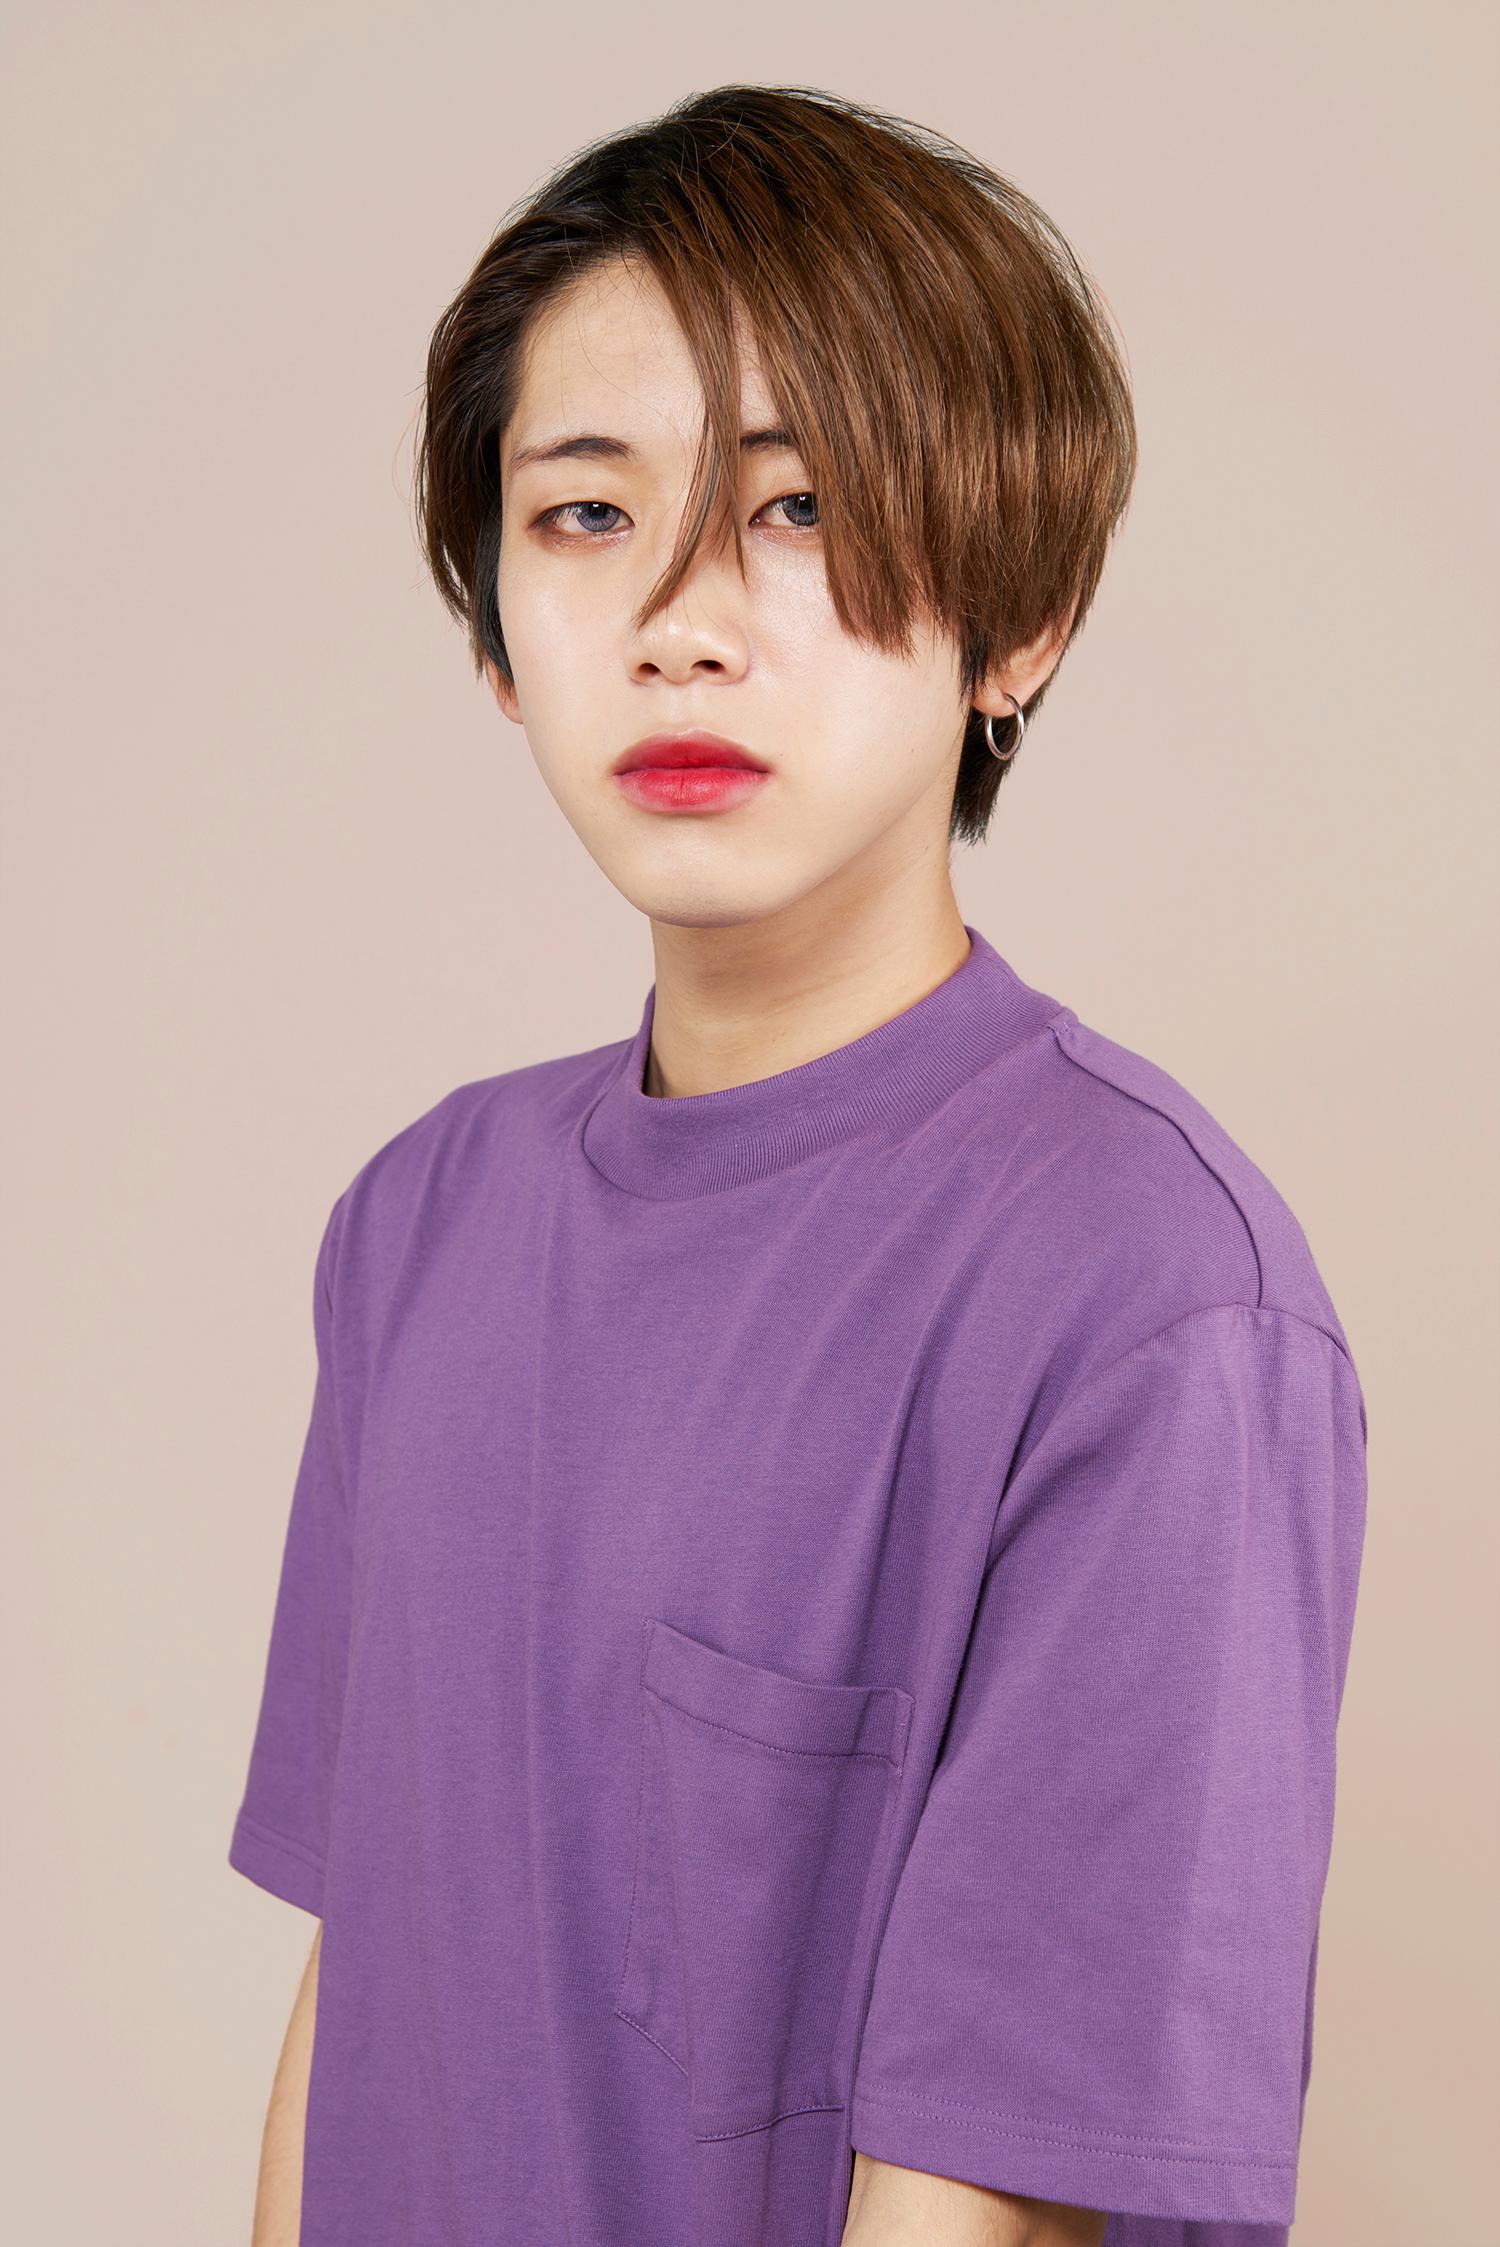 Corinne Mariaud Color Photograph - RUY-TOKYO - from the FLOWER BEAUTY BOYS Series